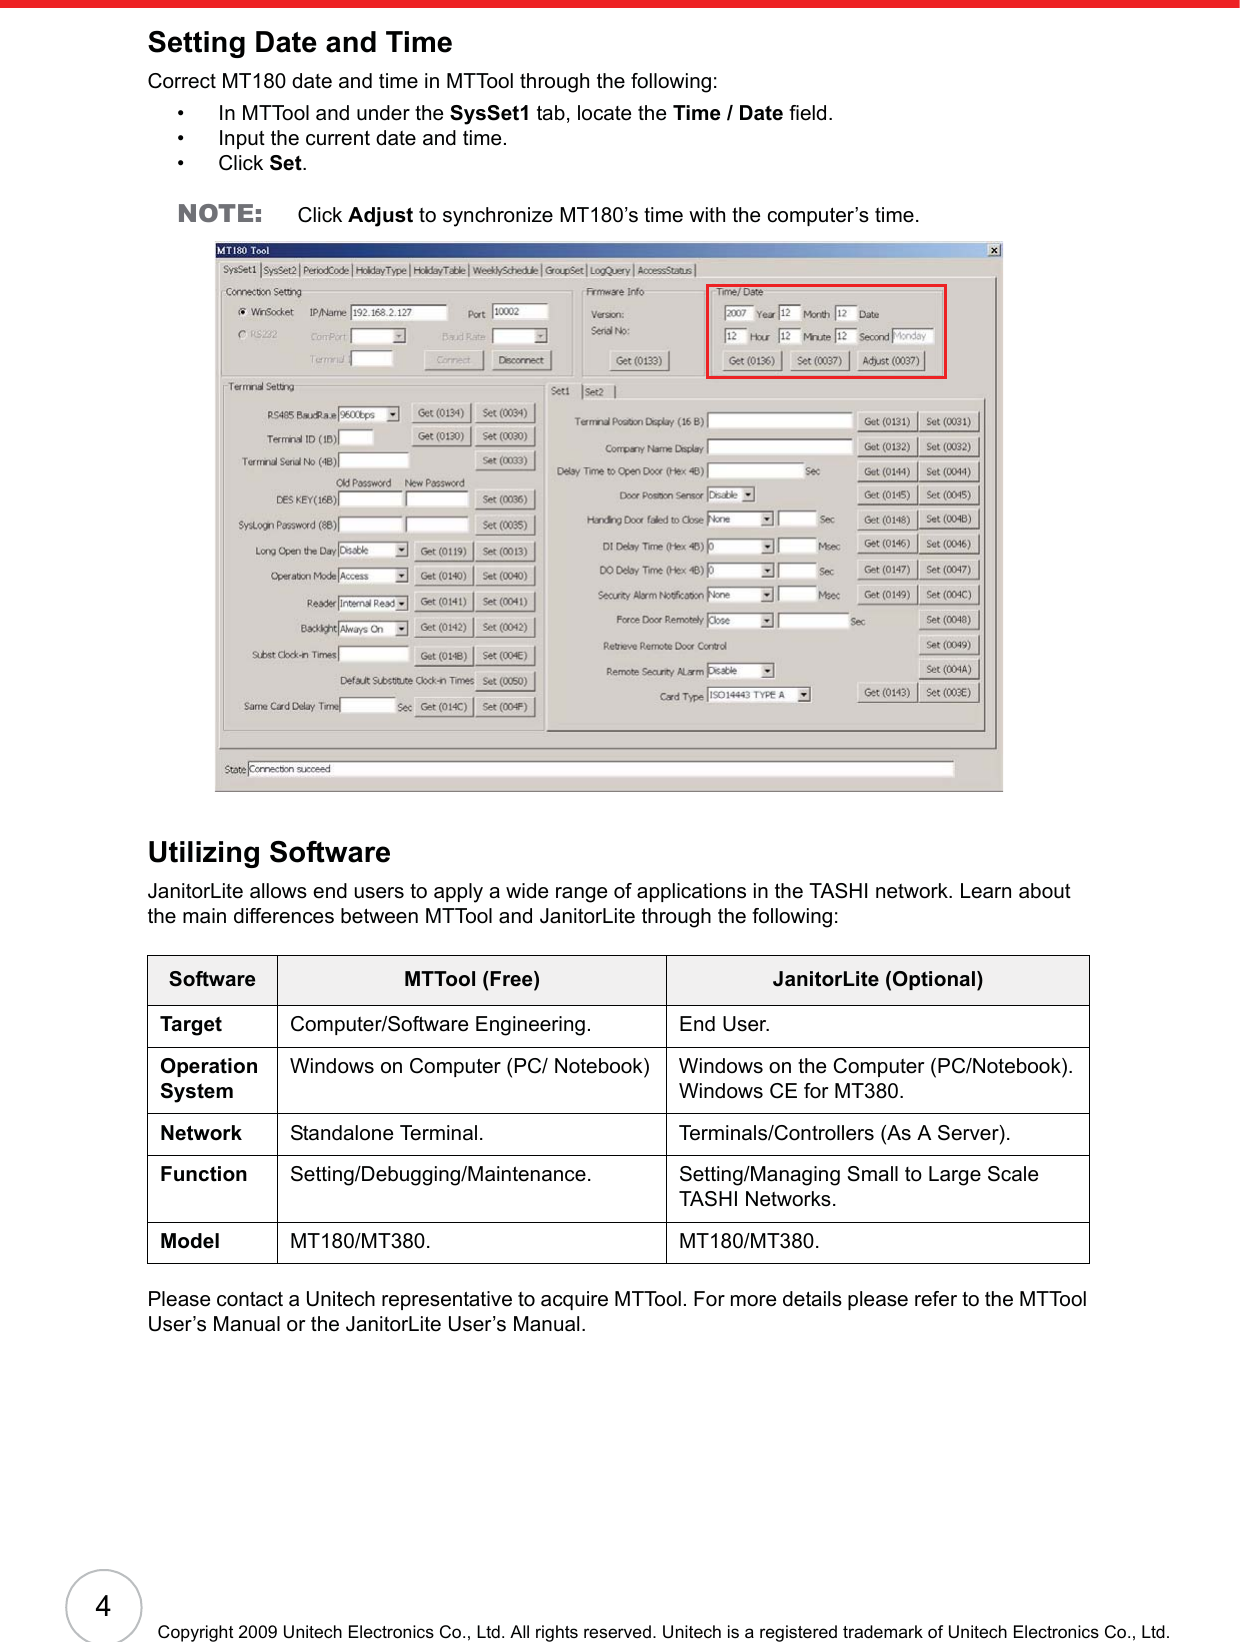 4Copyright 2009 Unitech Electronics Co., Ltd. All rights reserved. Unitech is a registered trademark of Unitech Electronics Co., Ltd.Setting Date and TimeCorrect MT180 date and time in MTTool through the following:• In MTTool and under the SysSet1 tab, locate the Time / Date field.• Input the current date and time.• Click Set.NOTE: Click Adjust to synchronize MT180’s time with the computer’s time.Utilizing SoftwareJanitorLite allows end users to apply a wide range of applications in the TASHI network. Learn about the main differences between MTTool and JanitorLite through the following:Please contact a Unitech representative to acquire MTTool. For more details please refer to the MTTool User’s Manual or the JanitorLite User’s Manual.Software MTTool (Free) JanitorLite (Optional)Target Computer/Software Engineering. End User.Operation SystemWindows on Computer (PC/ Notebook) Windows on the Computer (PC/Notebook).Windows CE for MT380.Network Standalone Terminal. Terminals/Controllers (As A Server).Function Setting/Debugging/Maintenance. Setting/Managing Small to Large Scale TASHI Networks.Model MT180/MT380. MT180/MT380.